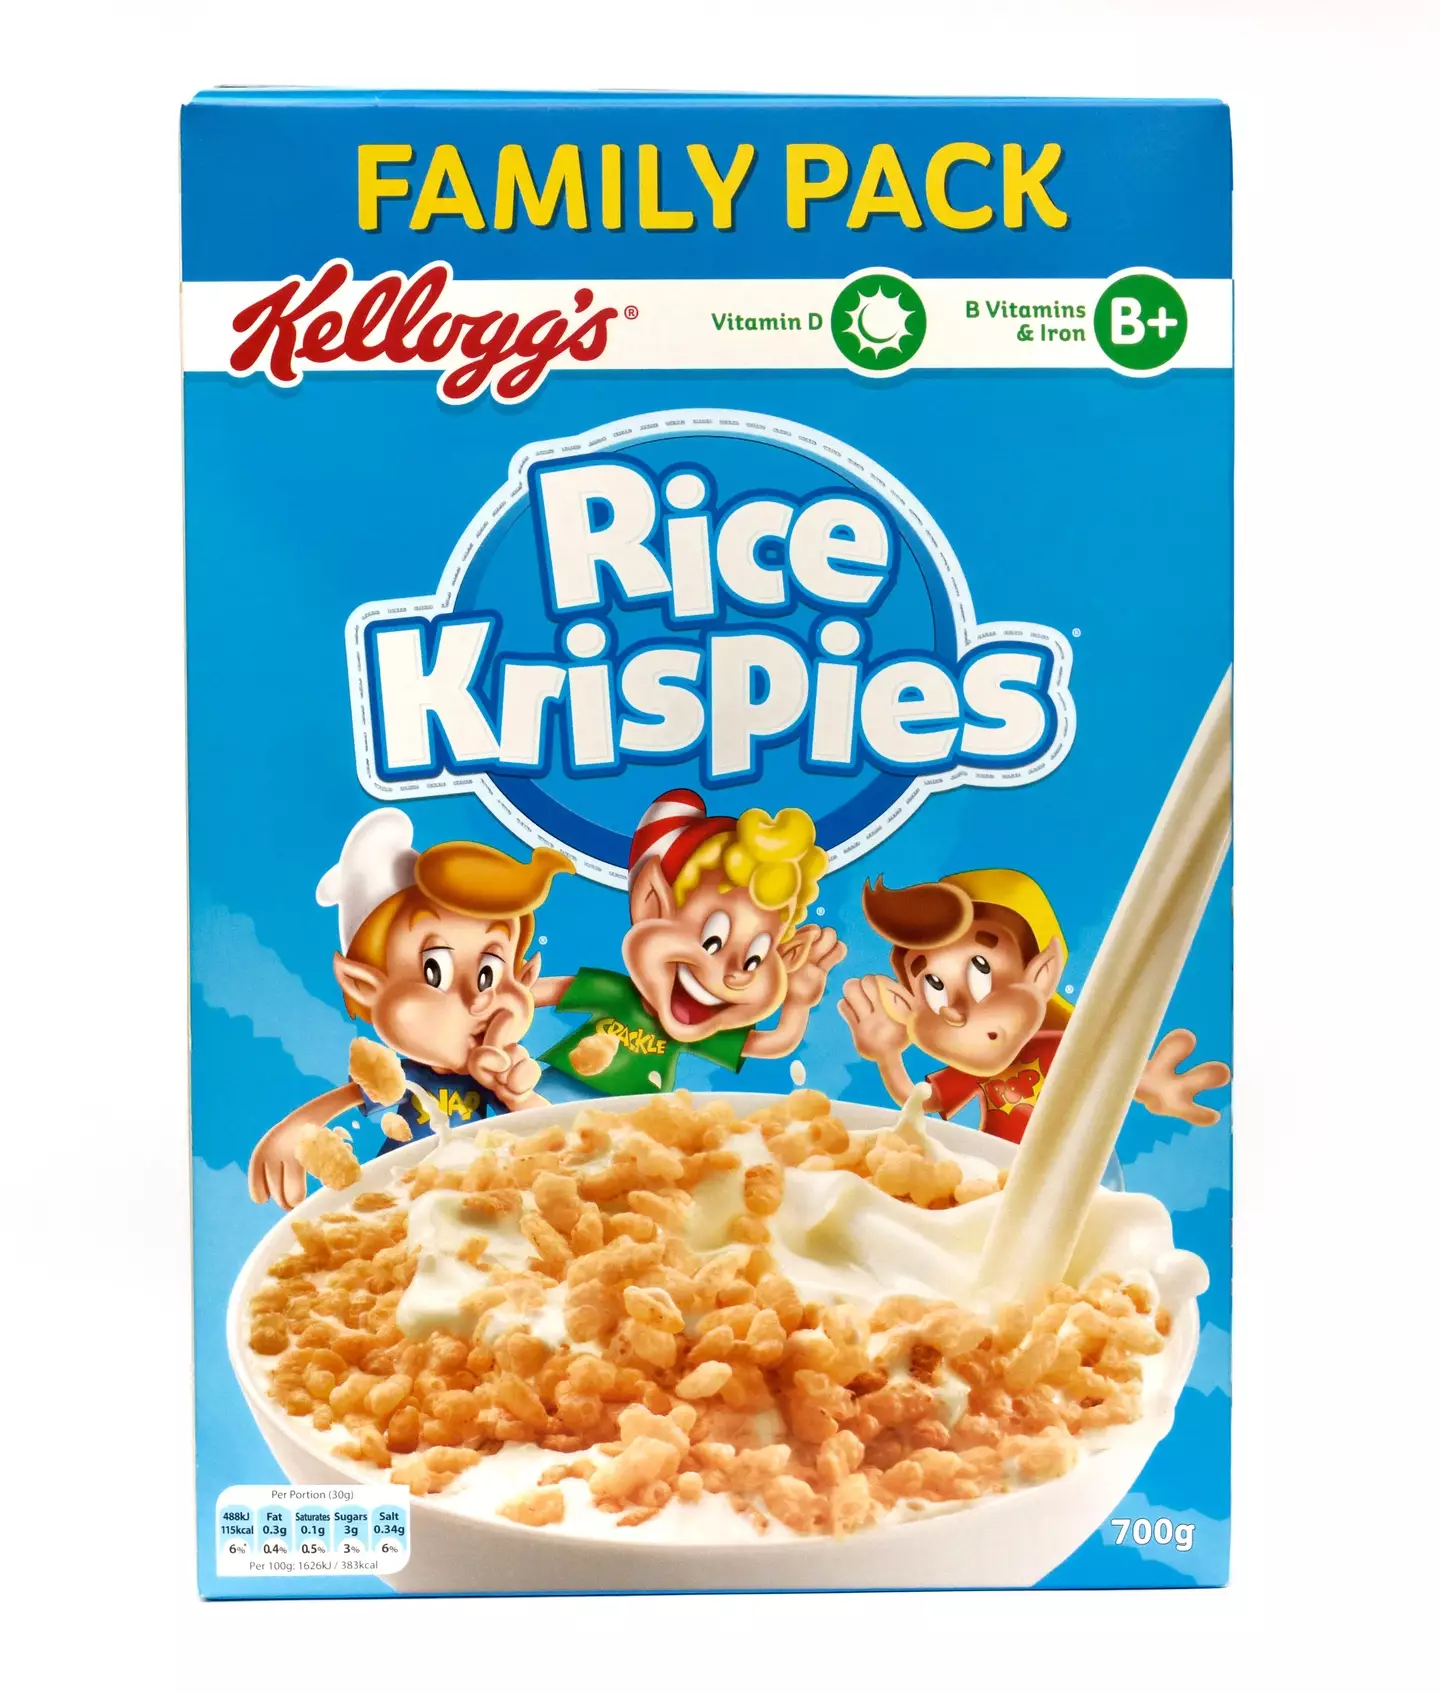 The mum said Rice Krispies are merely 'puffs of air'.